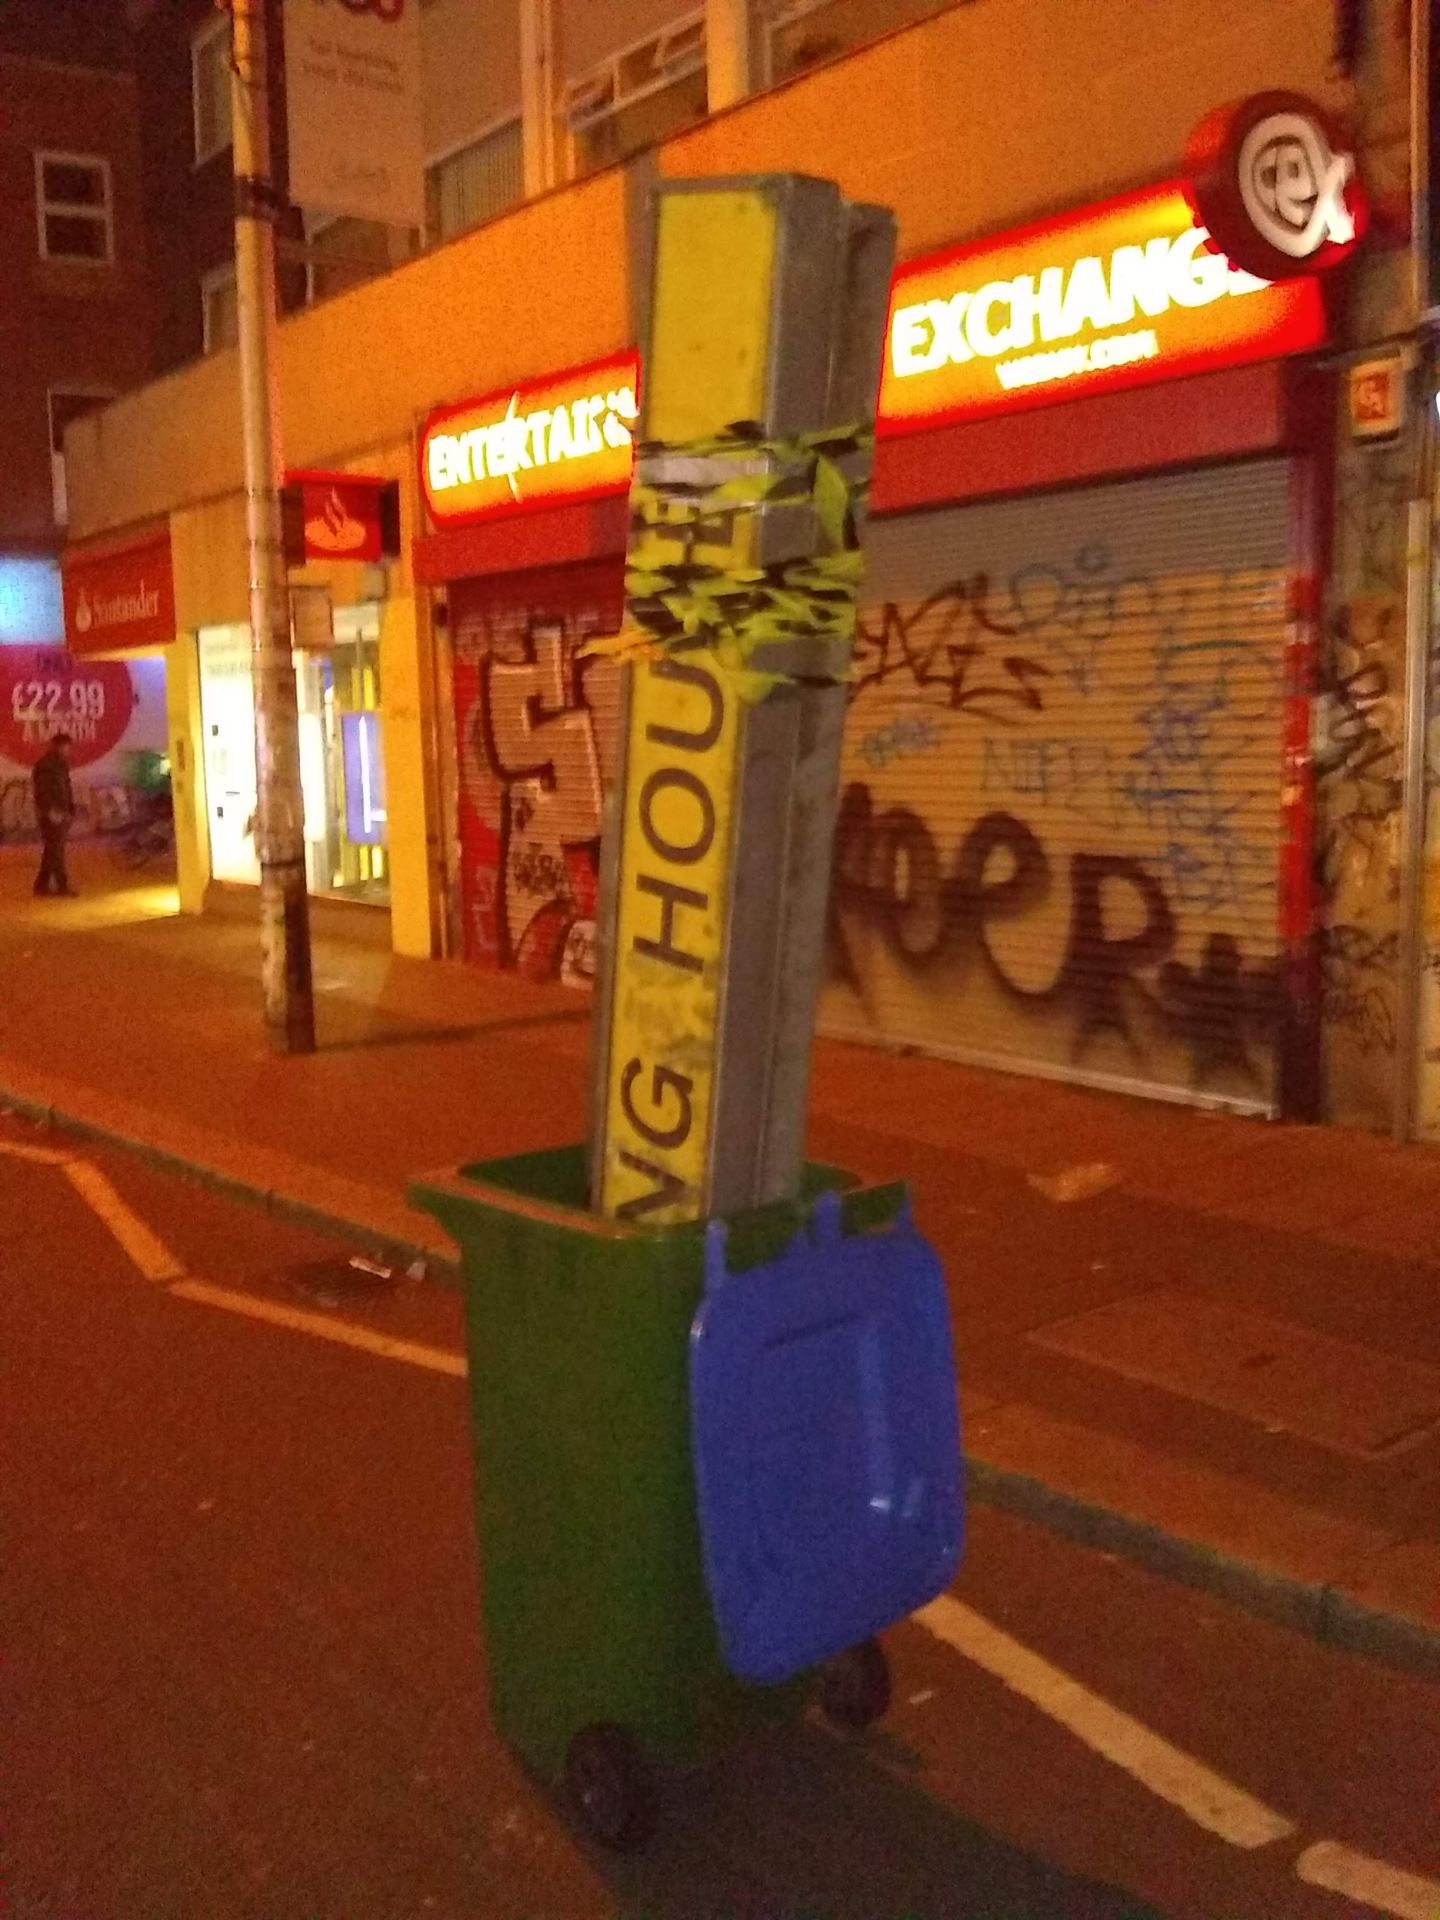 An image of a sign in a green wheelie-bin on a street at night.